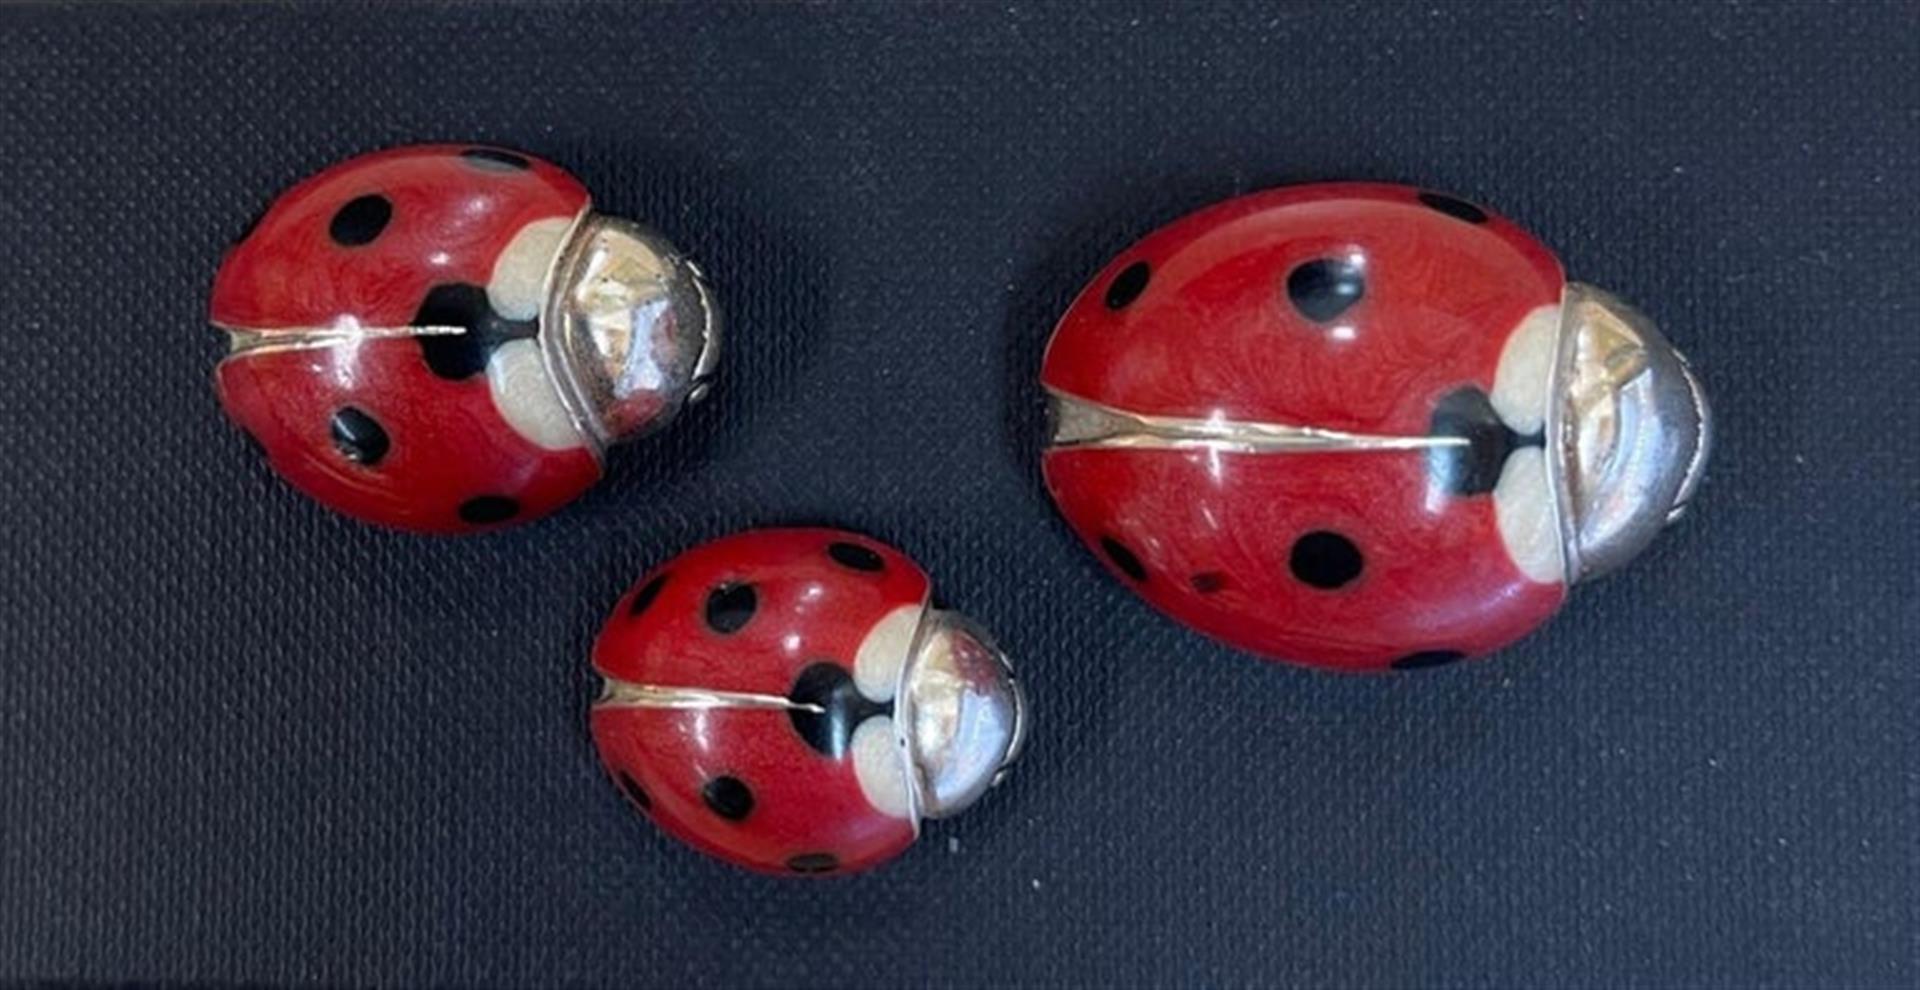 Simply Delightful! Vintage Set of 3 Mid Century Modern Red and Black Enamel Sterling Silver Ladybugs. Beautifully Hand crafted in solid Sterling Silver, enameled in Red and Black. Raised design on the Sterling Silver beneath. Approx. Measurements